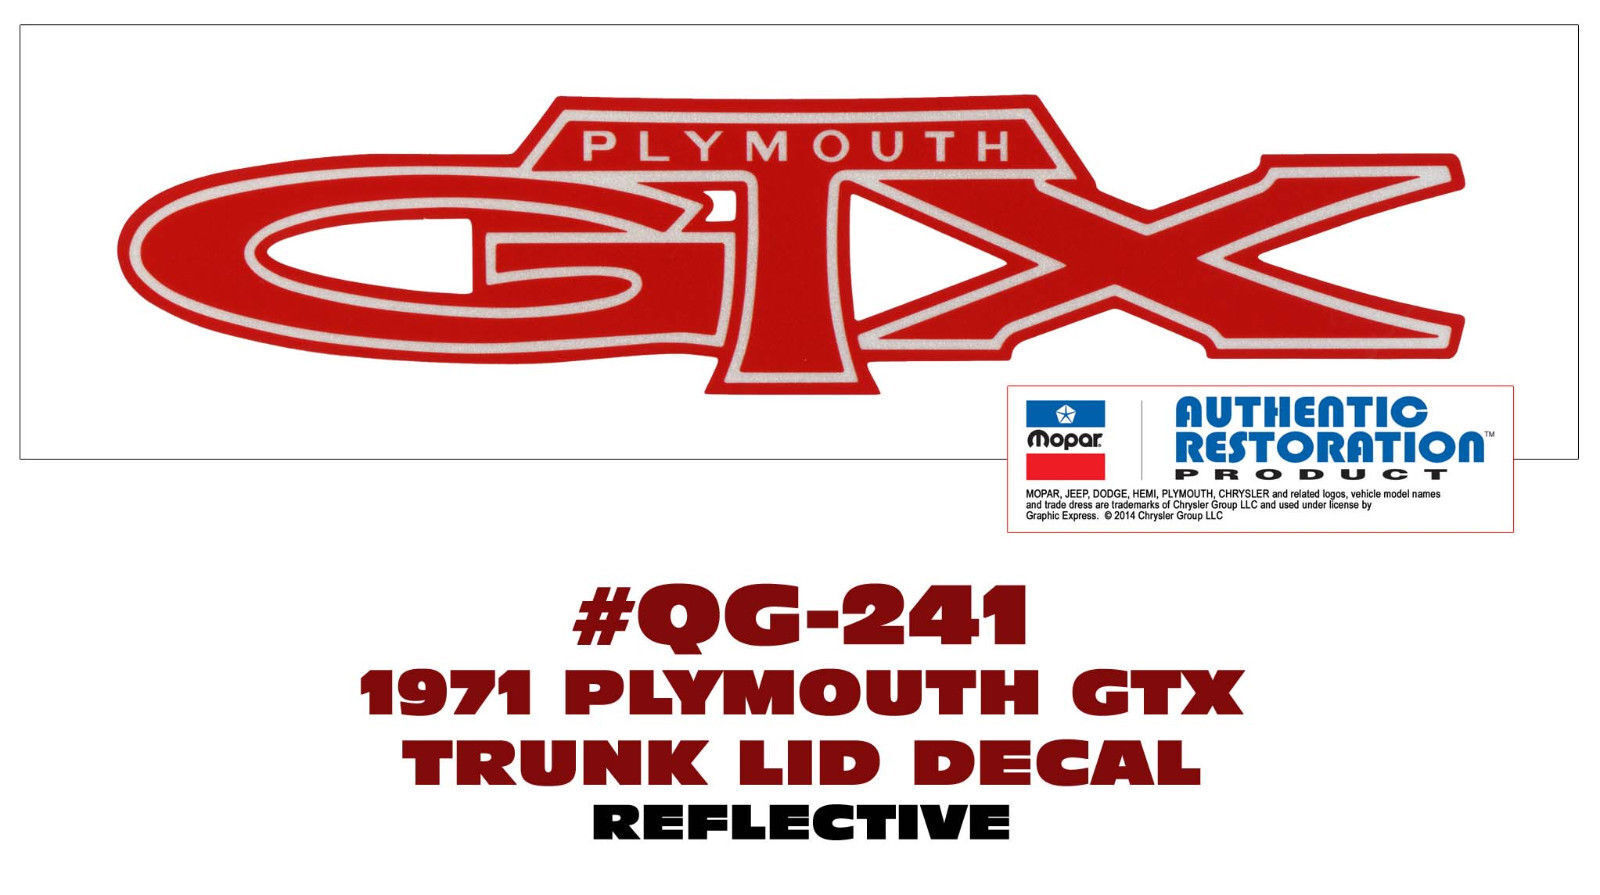 GE-QG-241 1971 PLYMOUTH GTX - DECK LID DECAL - ONE DECAL - REFLECTIVE - LICENSED